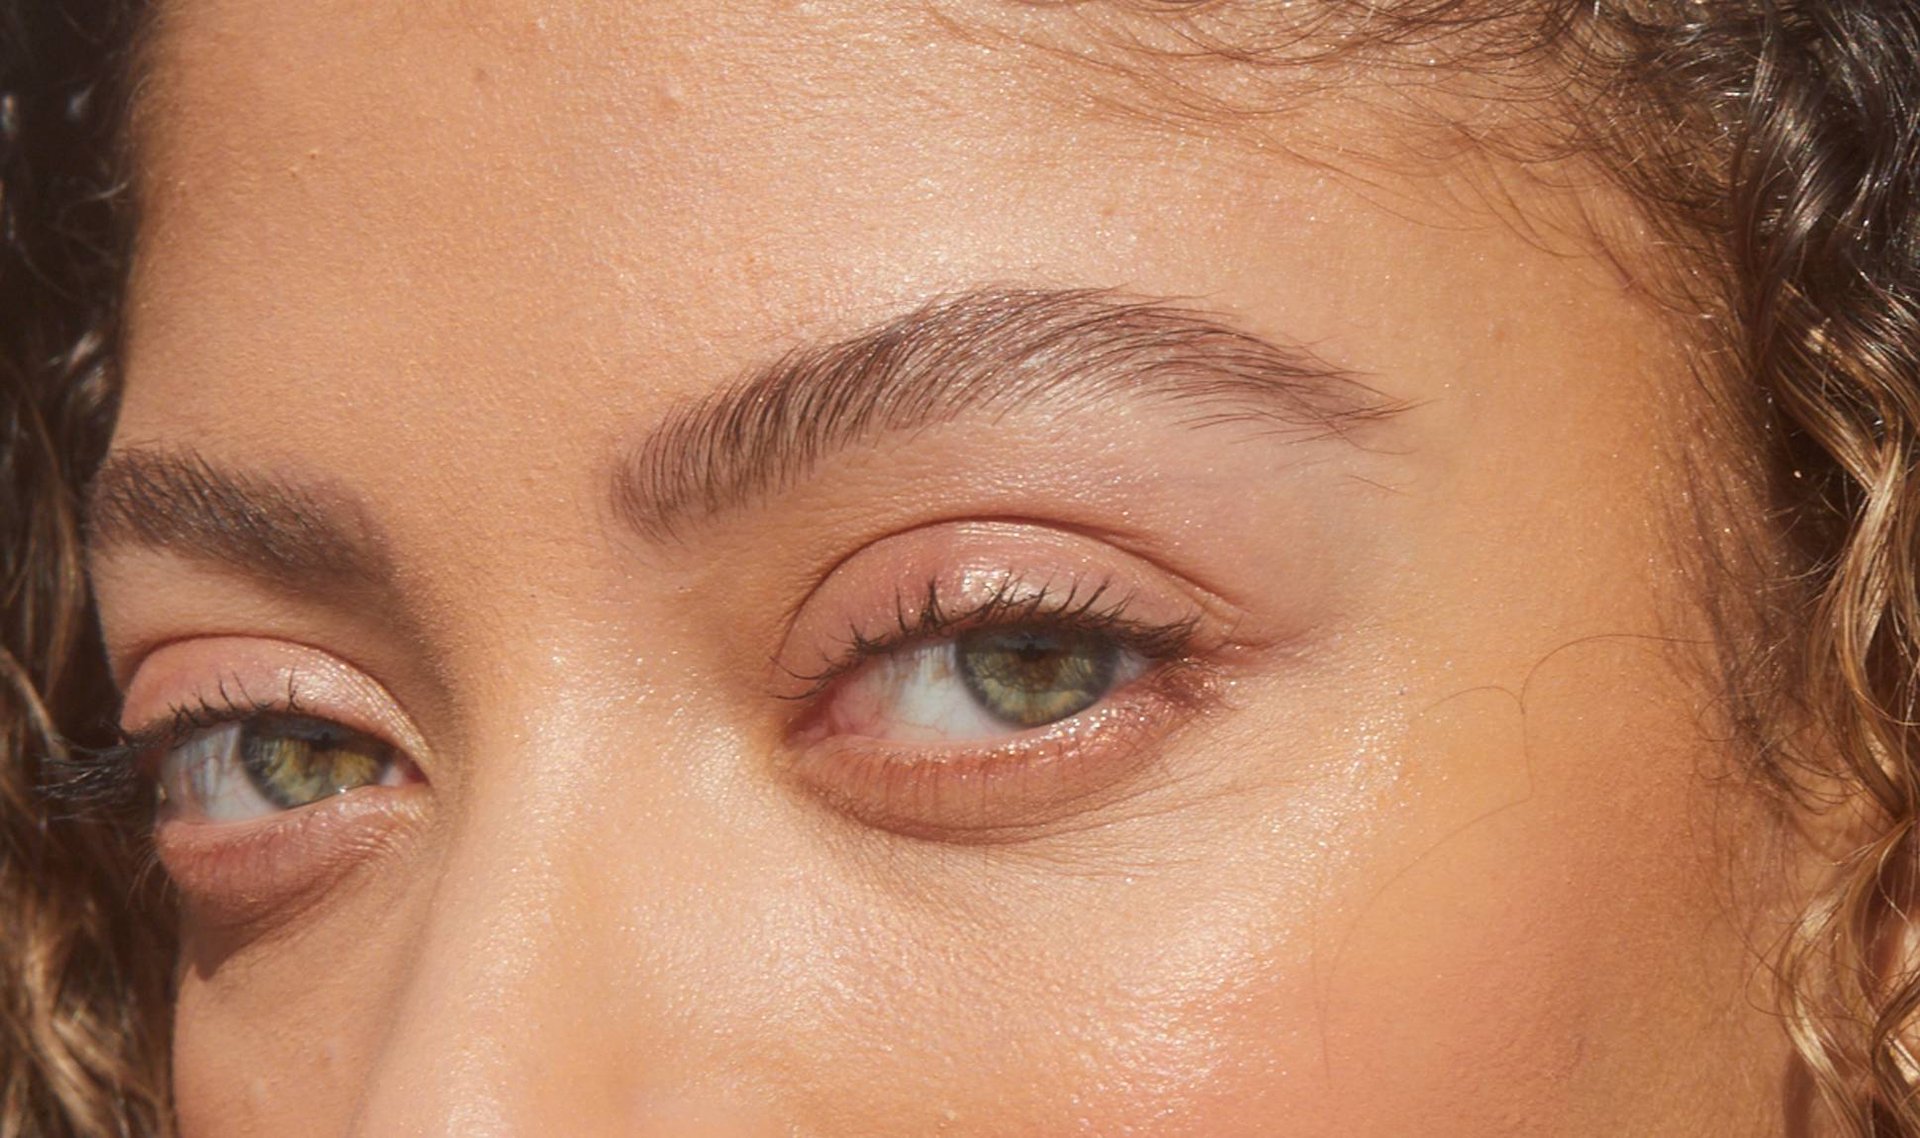 Can Grooming Your Brows Cause Eyebrow Acne?